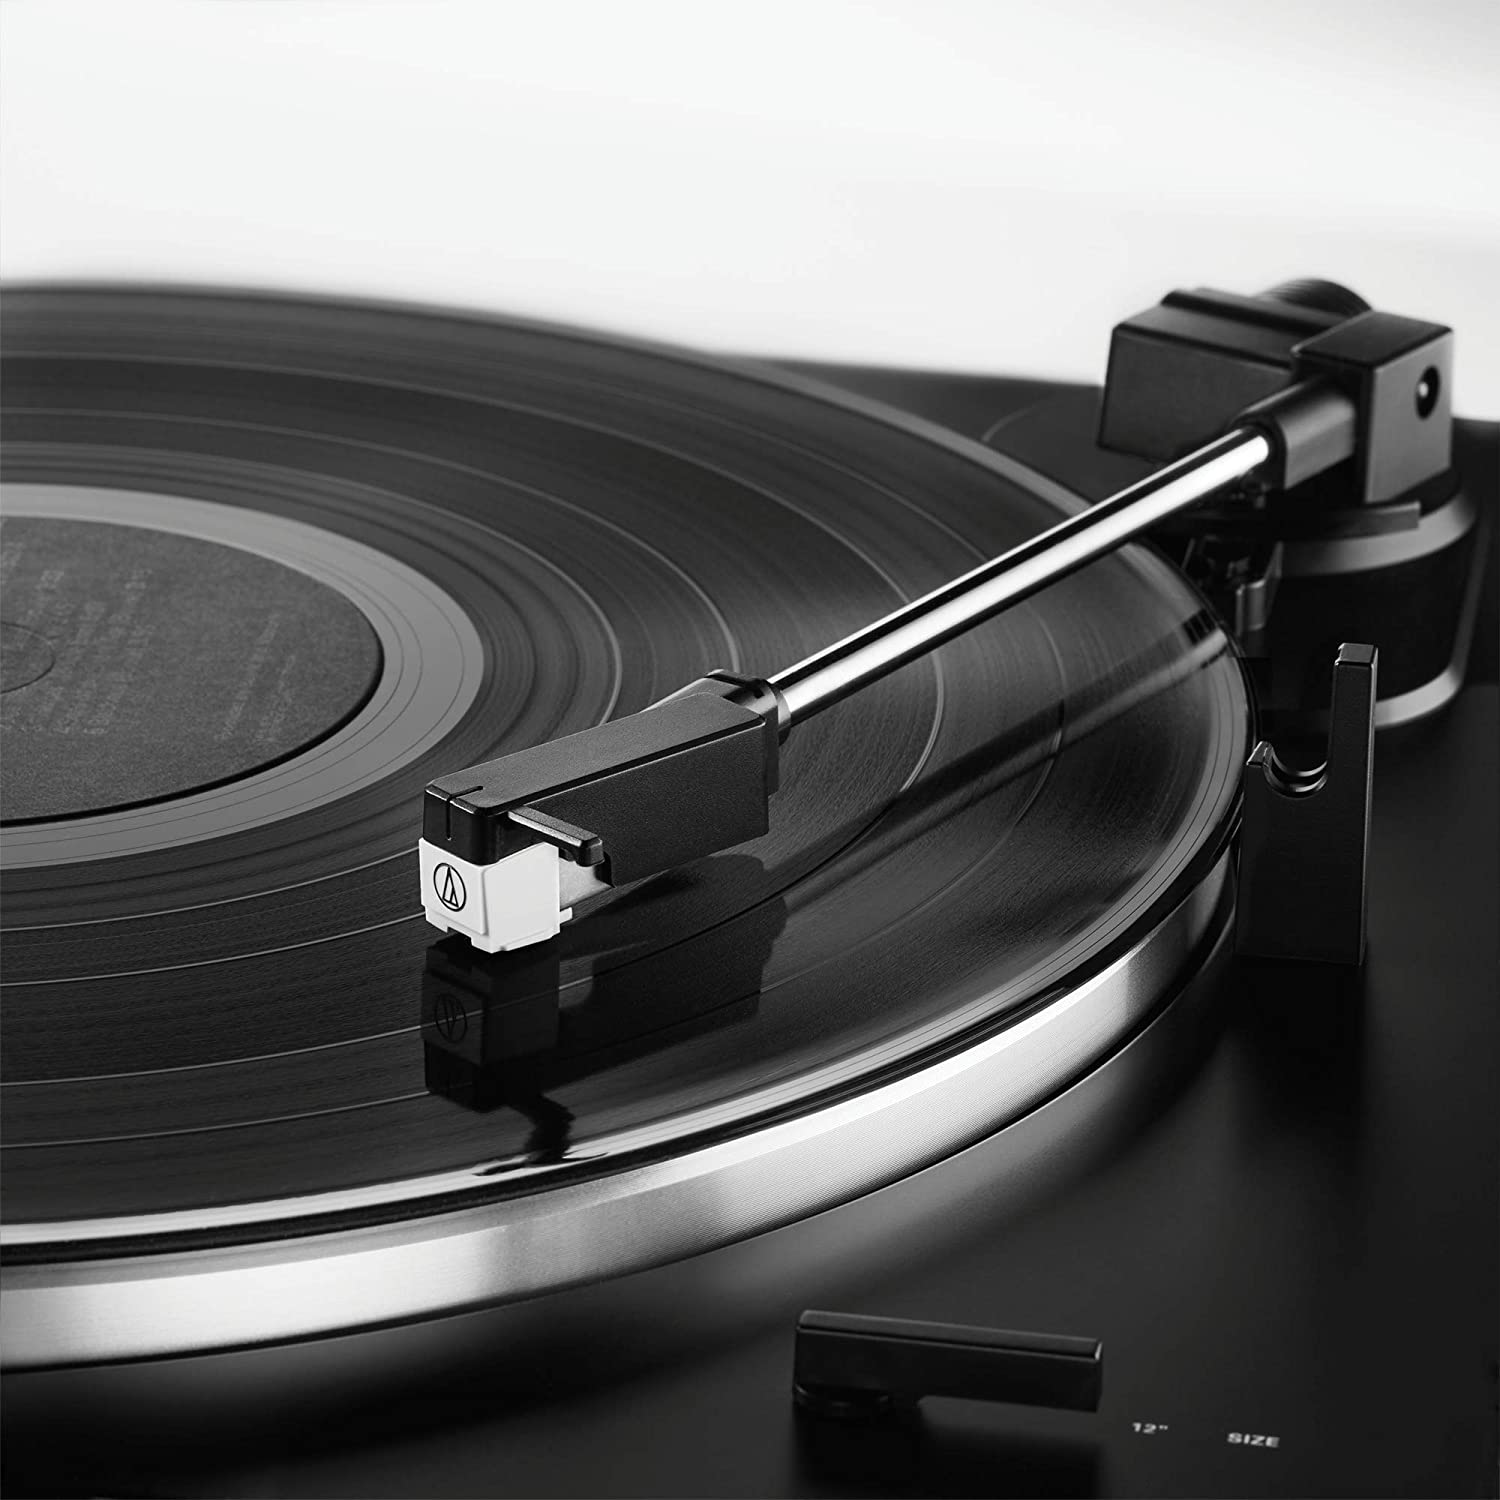 1byone turntable